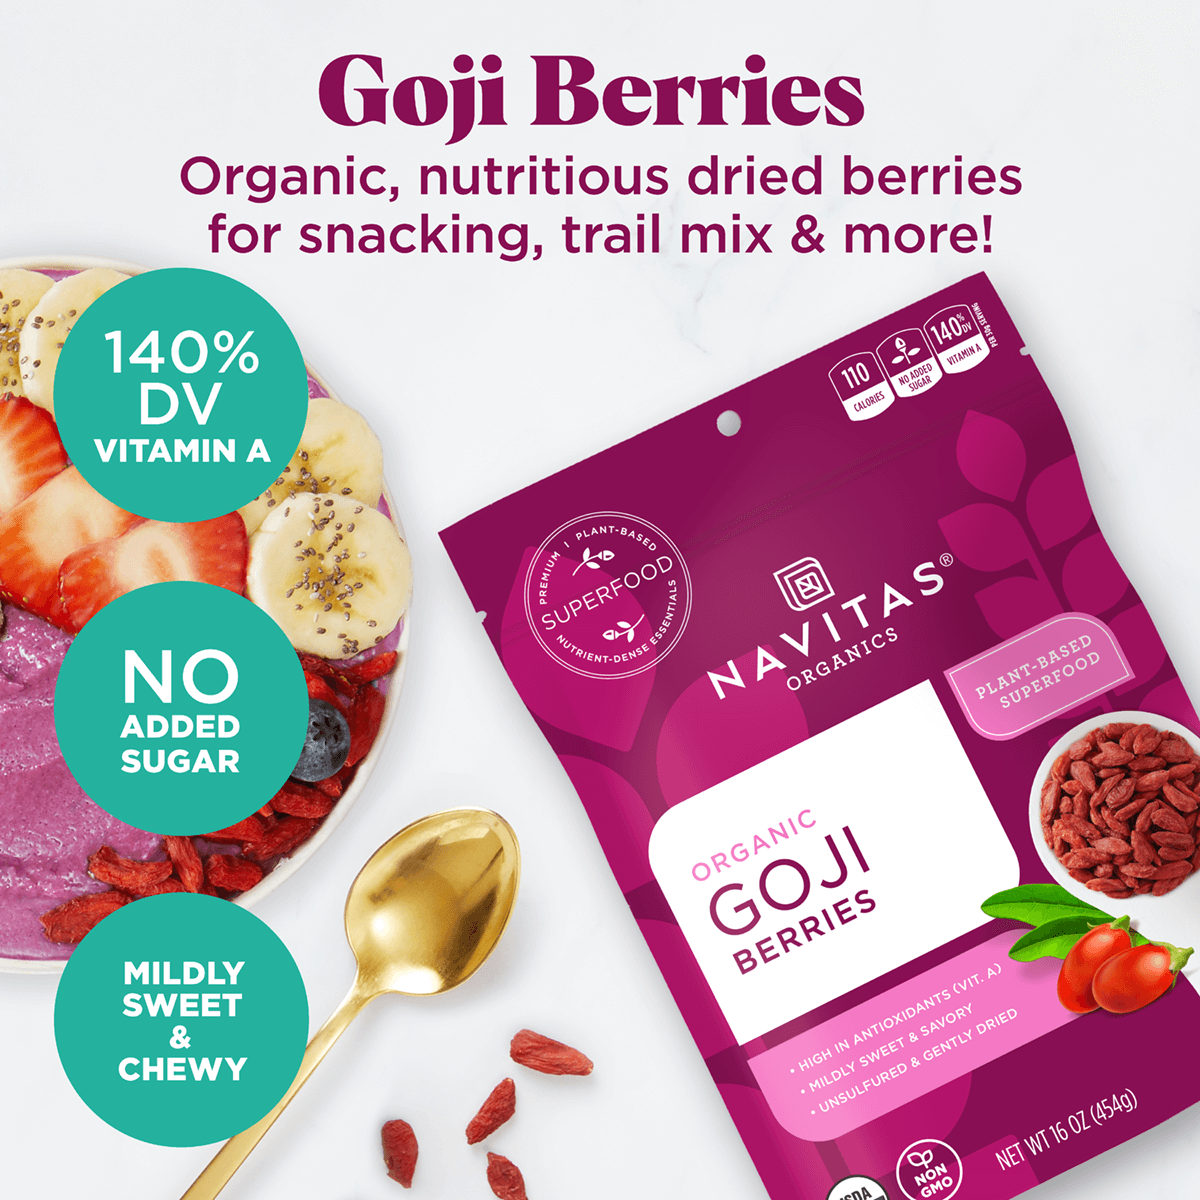 Goji Berries. Organic, nutritious dried berries for snacking, trail mix & more! 140% DV Vitamin A. No added sugar. Mildly sweet & chewy.